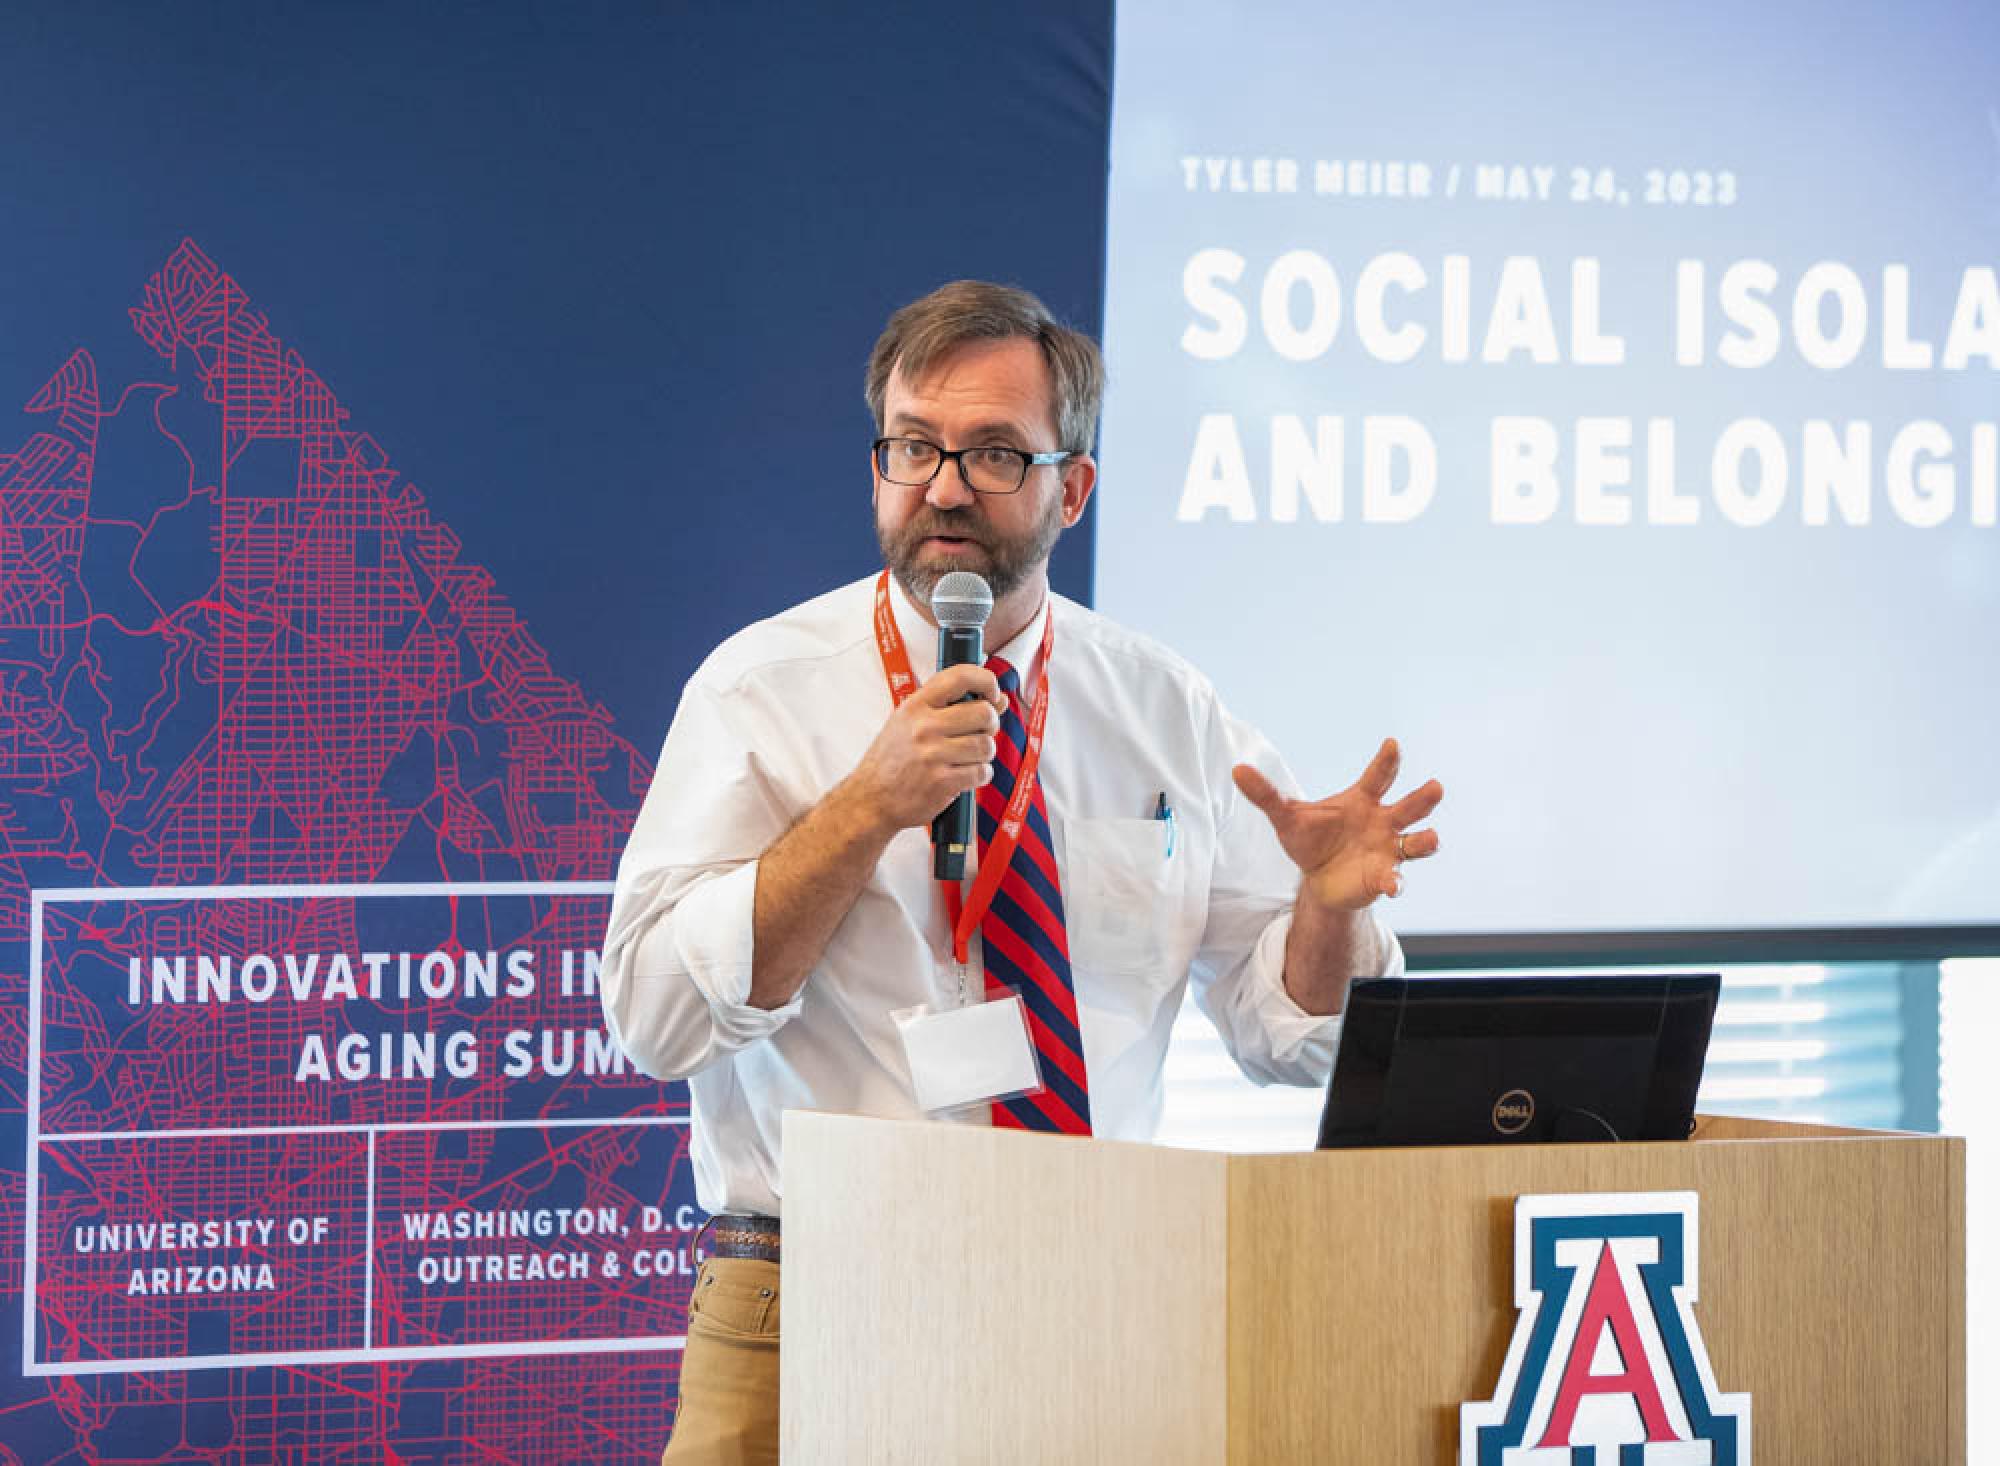 A brown-haired man speaks fervently into a microphone at a podium with the University of Arizona logo. A graphic displayed on a screen behind him reads &quot;Social Isolation and Belonging.&quot;